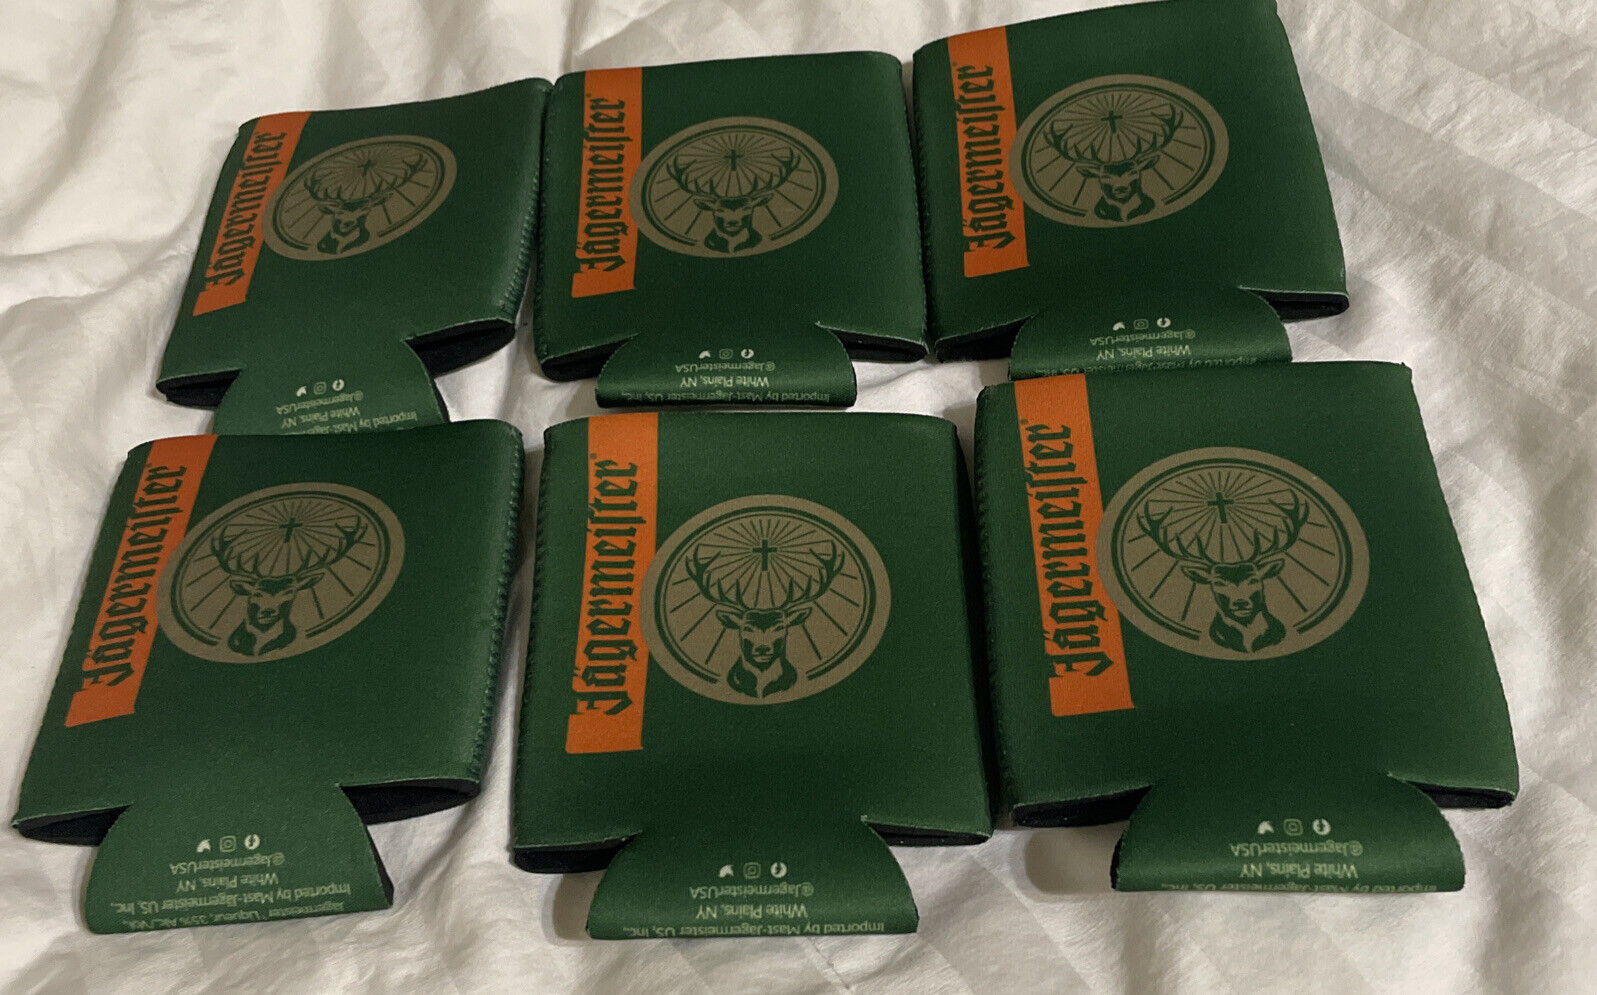 Brand New Jagermeister Can / Bottle Coozy Koozy Mini Side Slot Set Of 8 NWT